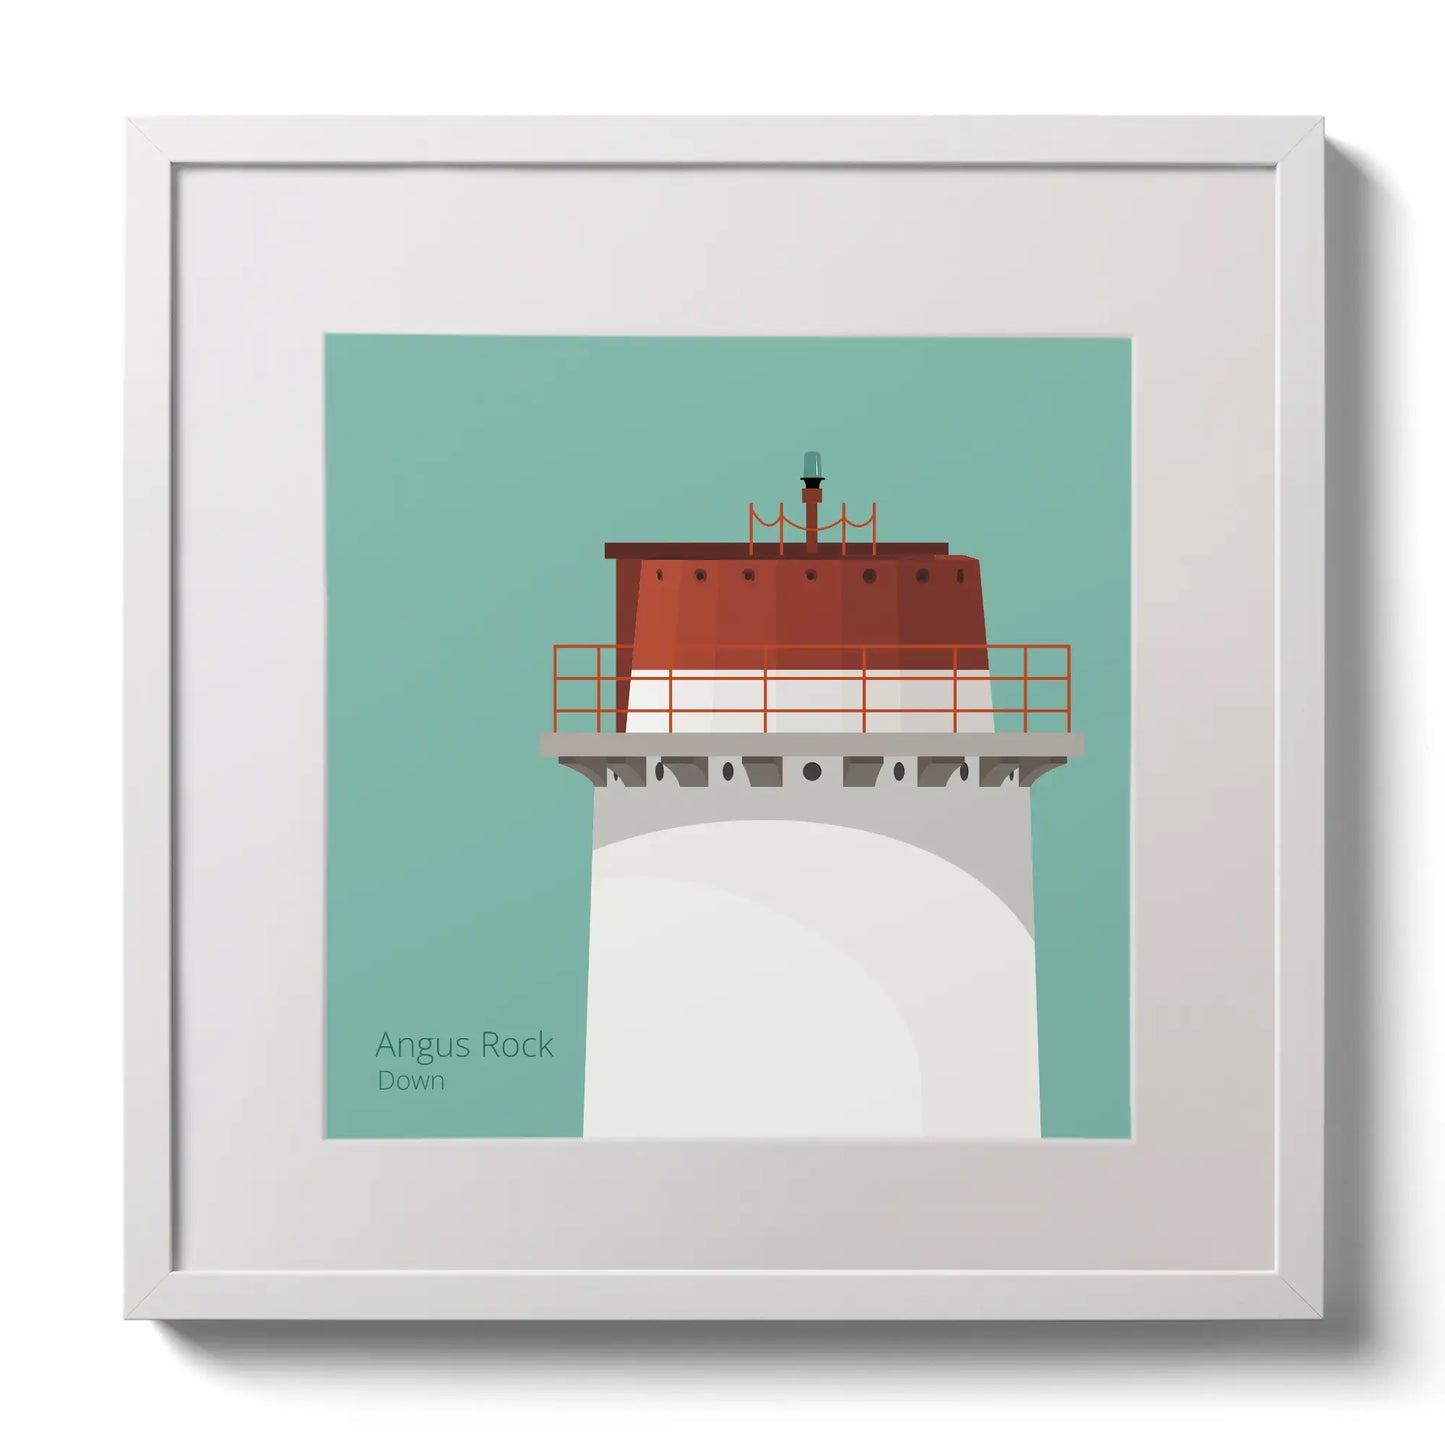 Illustration Angus Rock lighthouse on an ocean green background,  in a white square frame measuring 30x30cm.